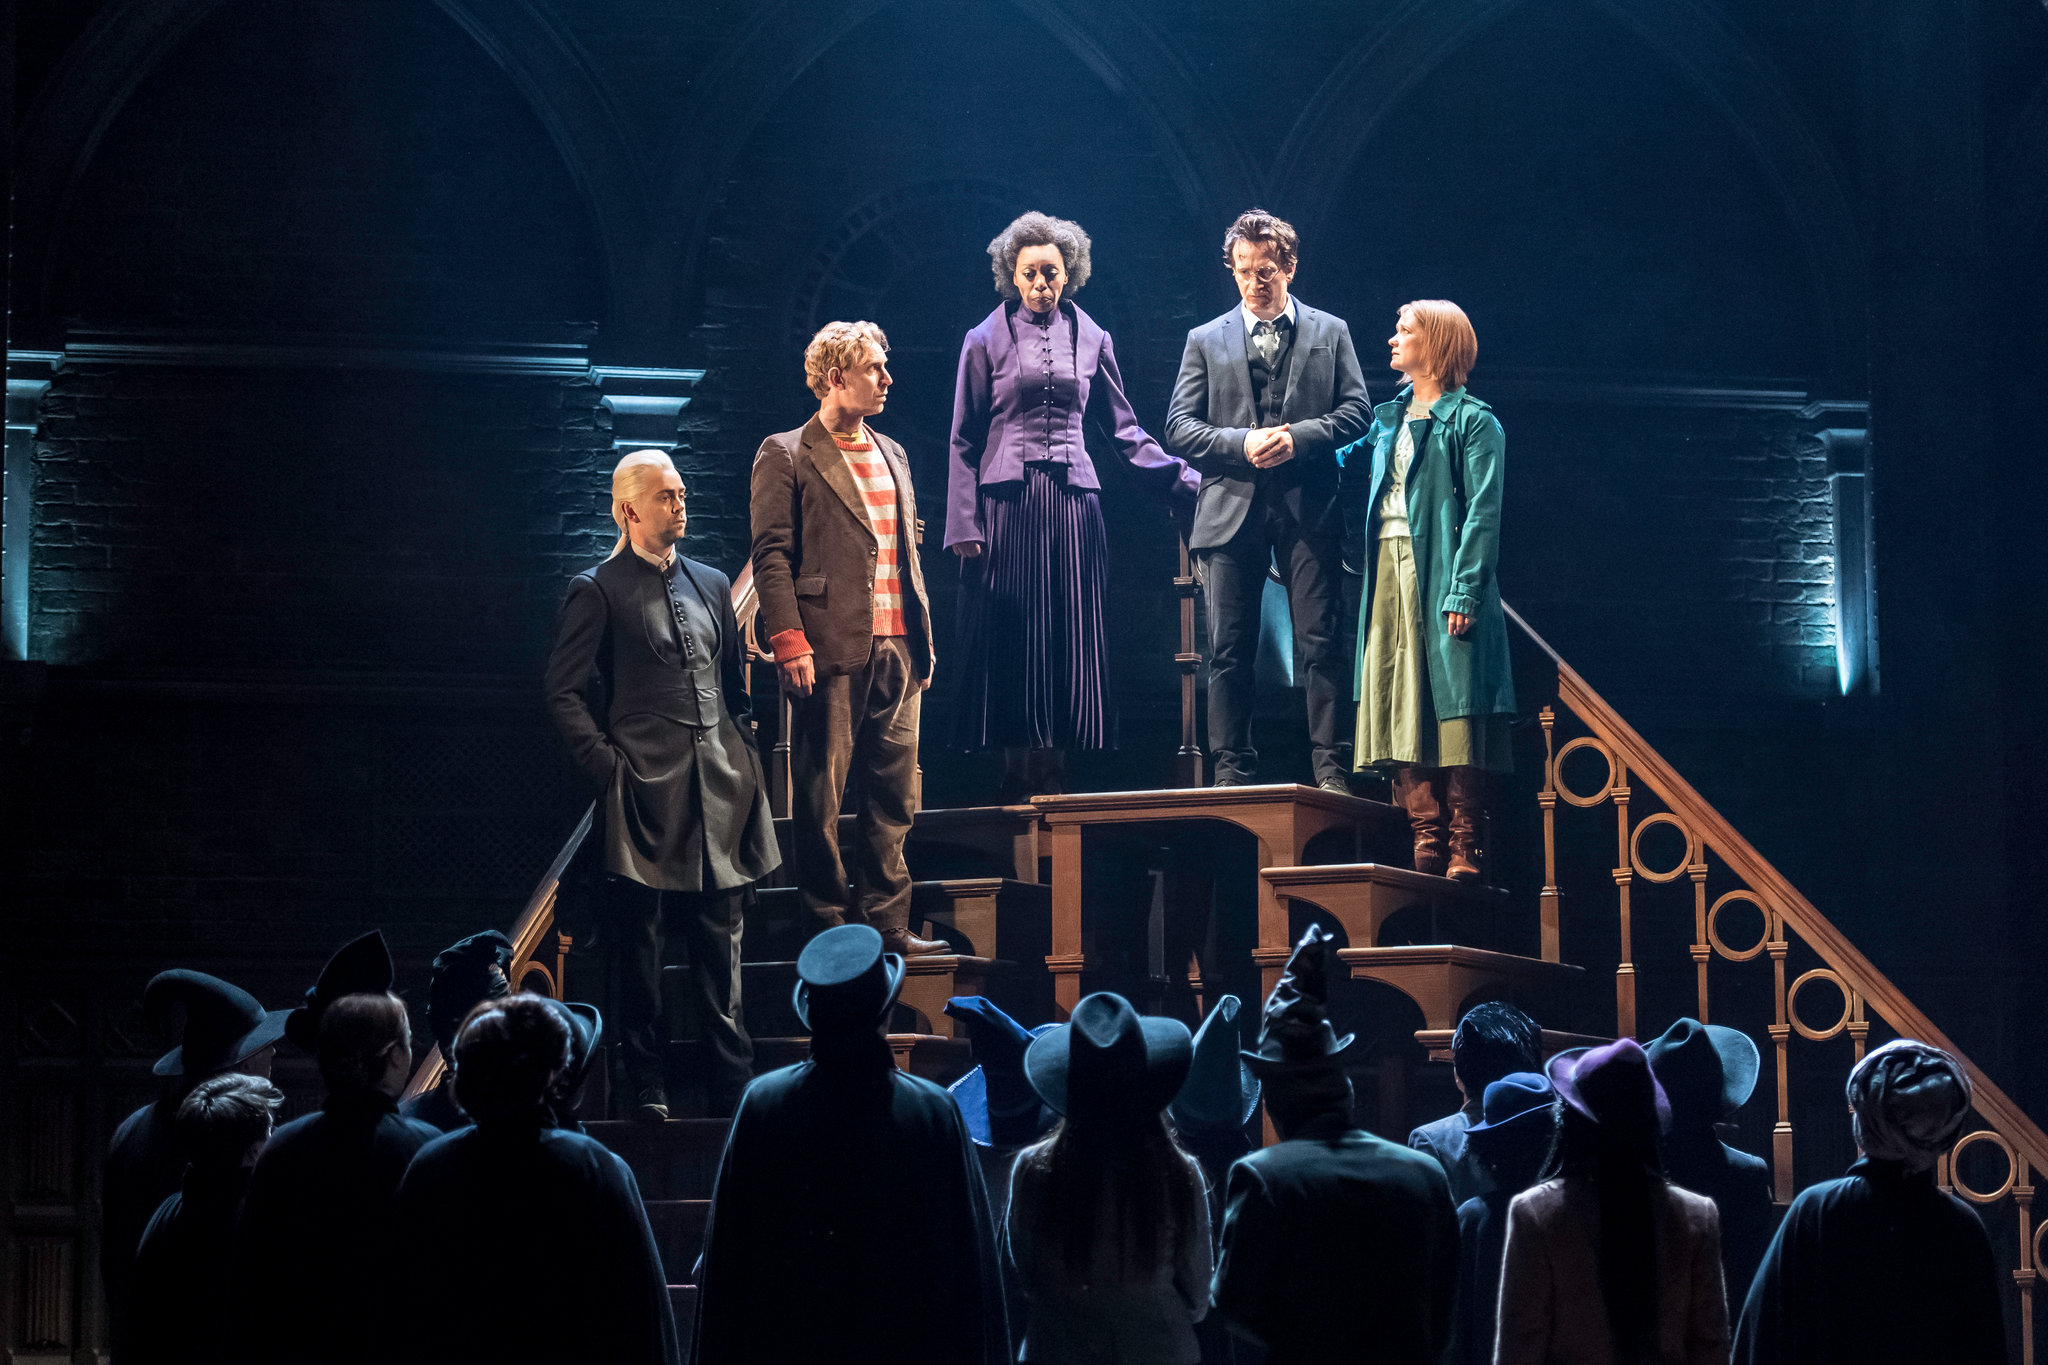 Harry Potter and The Cursed Child - Part 1 & 2 (10/1 7:30PM & 10/2 7:30PM) at Lyric Theatre